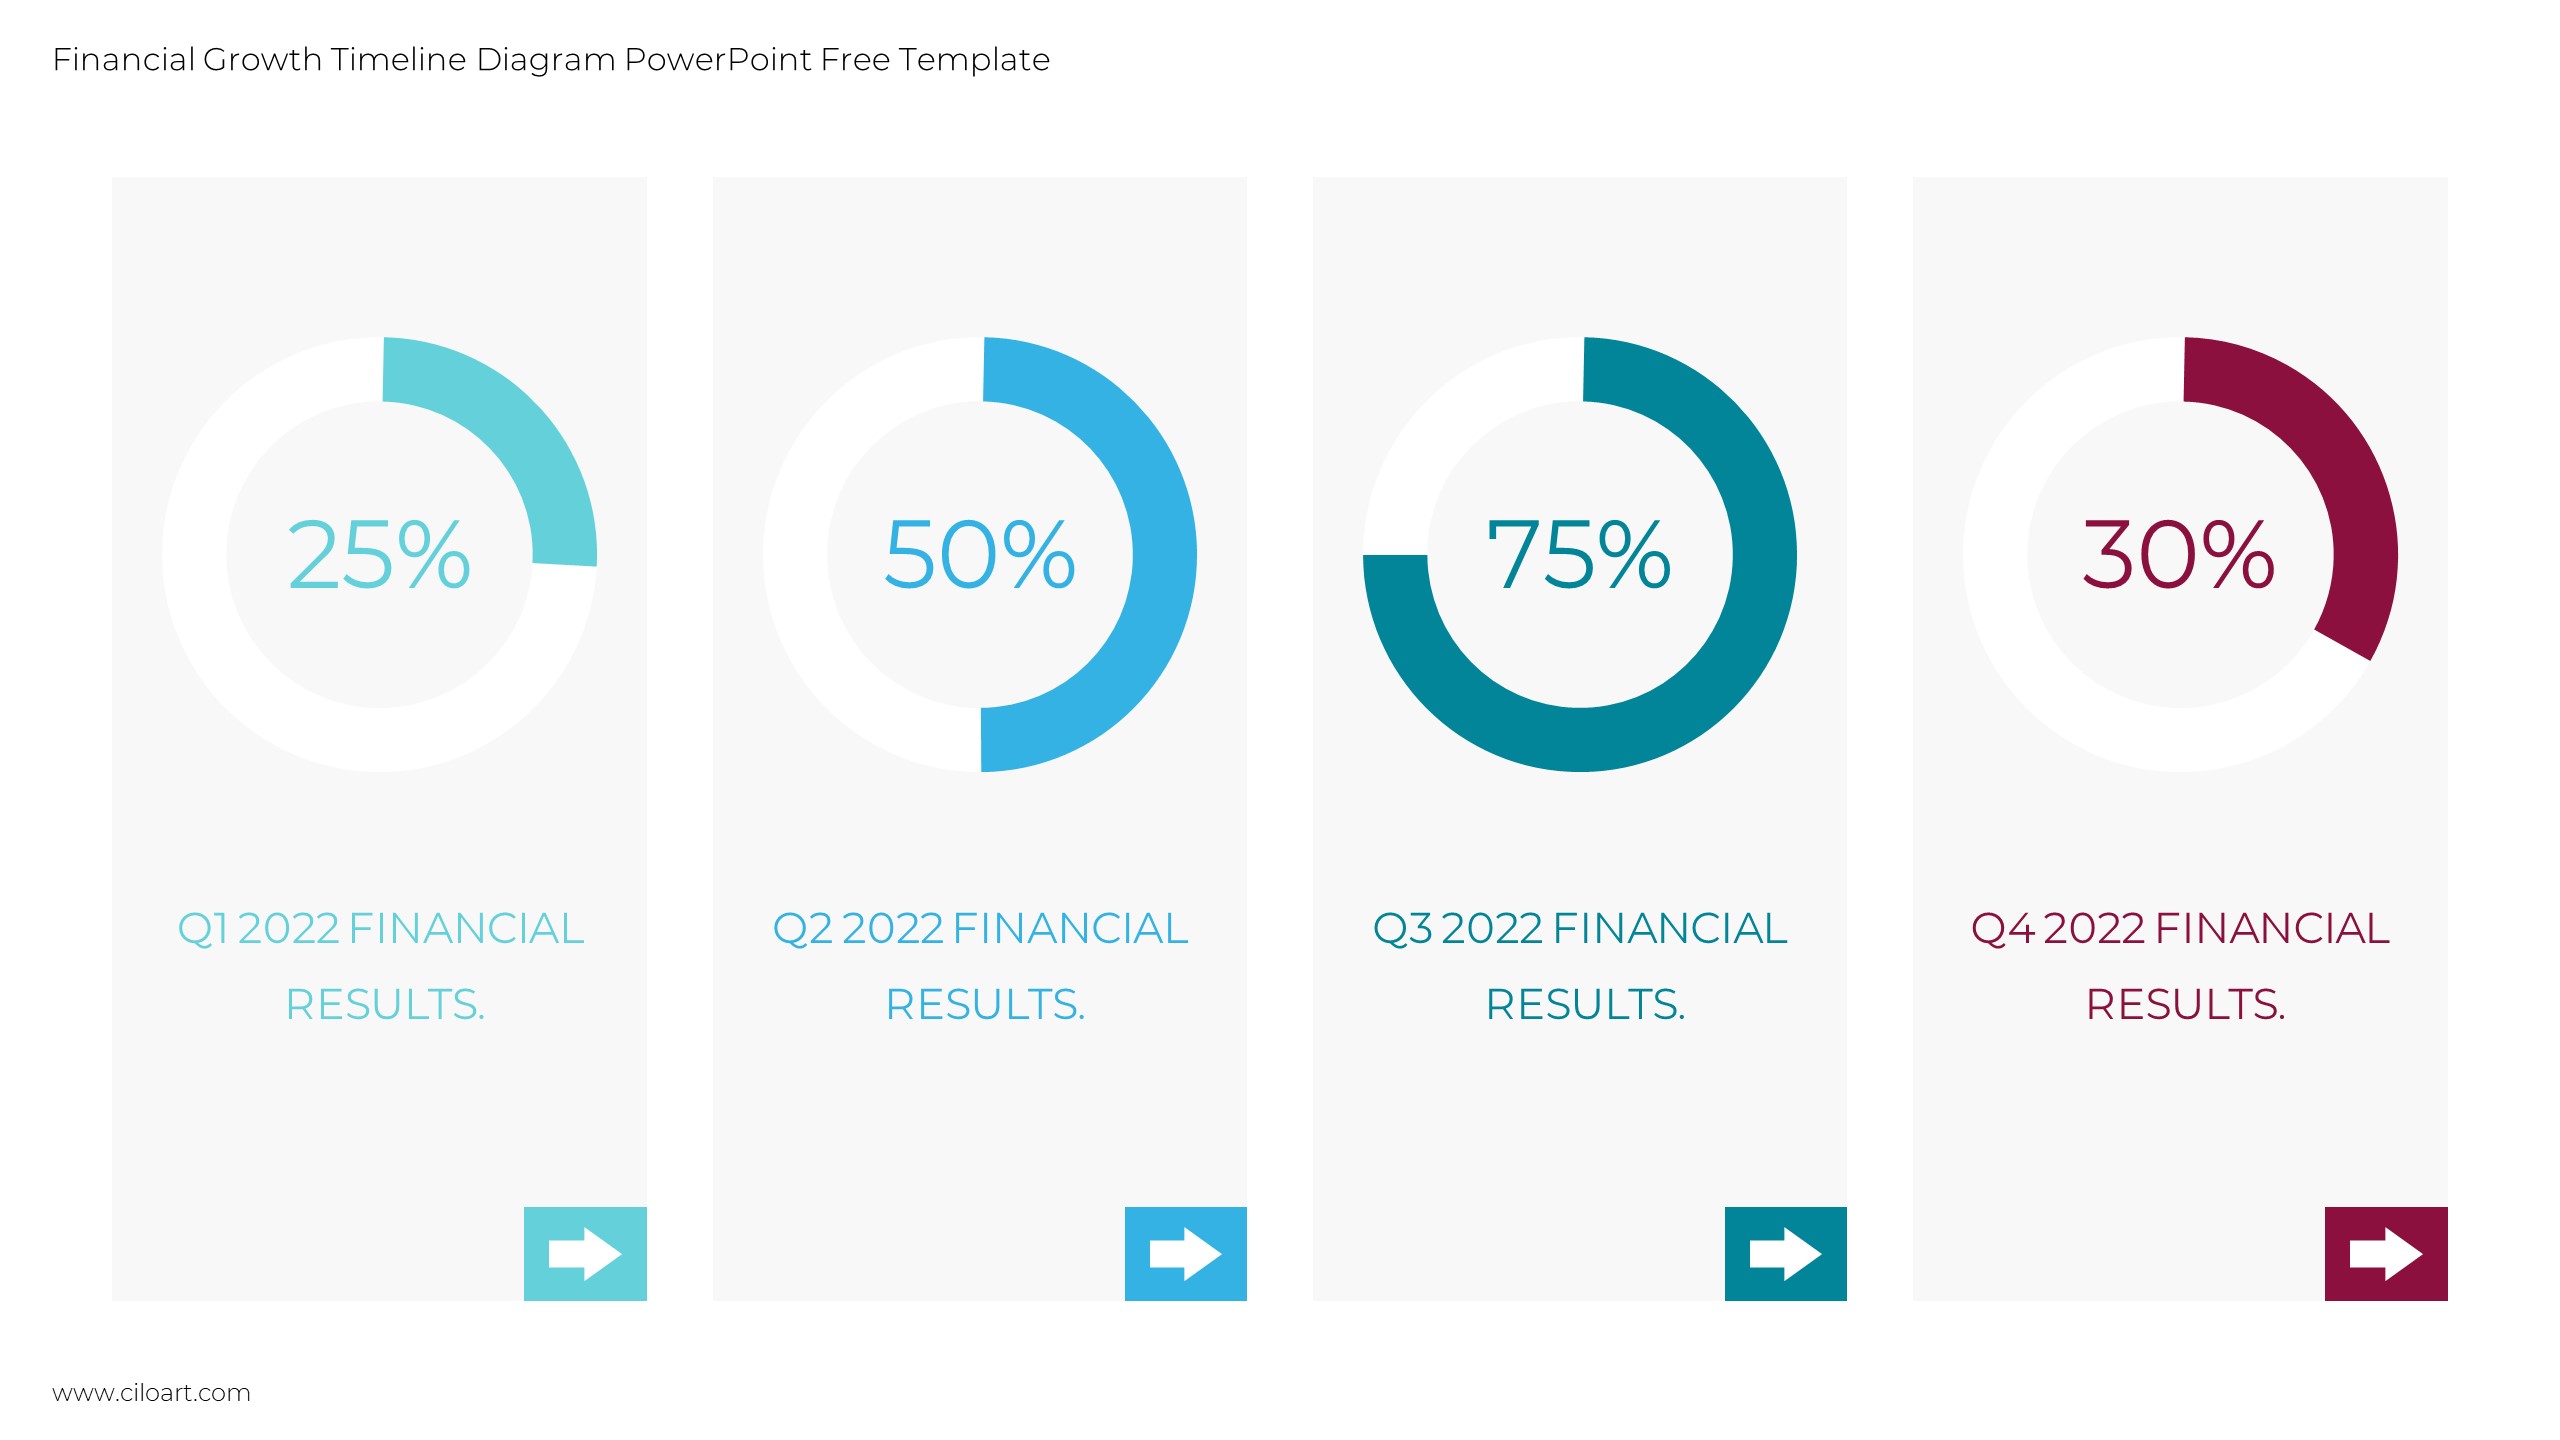 Financial Growth Timeline Diagram PowerPoint Free Template